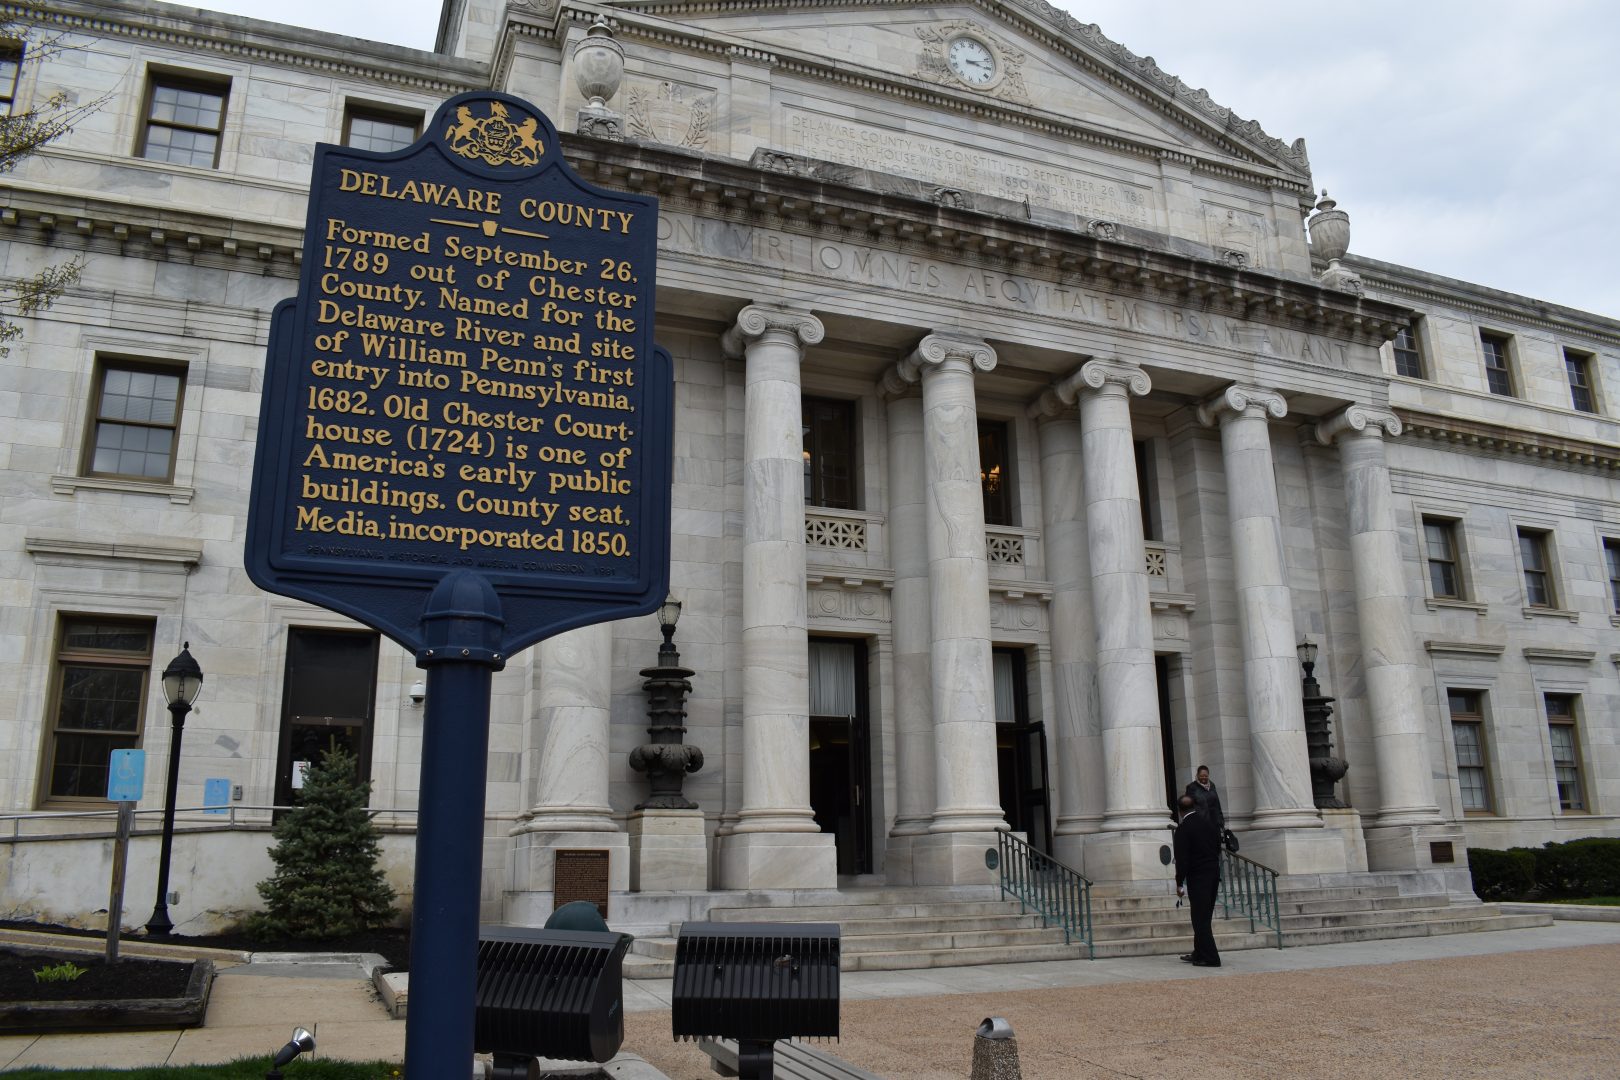 The Delaware County courthouse in Media, Pennsylvania, is seen on April 11,  2019.

In the county in 2017, there were 206 protection-from-abuse cases that ended with a stipulation or agreement between the parties, 187 final orders granted after a hearing before a judge, and 147 final orders denied after a hearing before a judge.